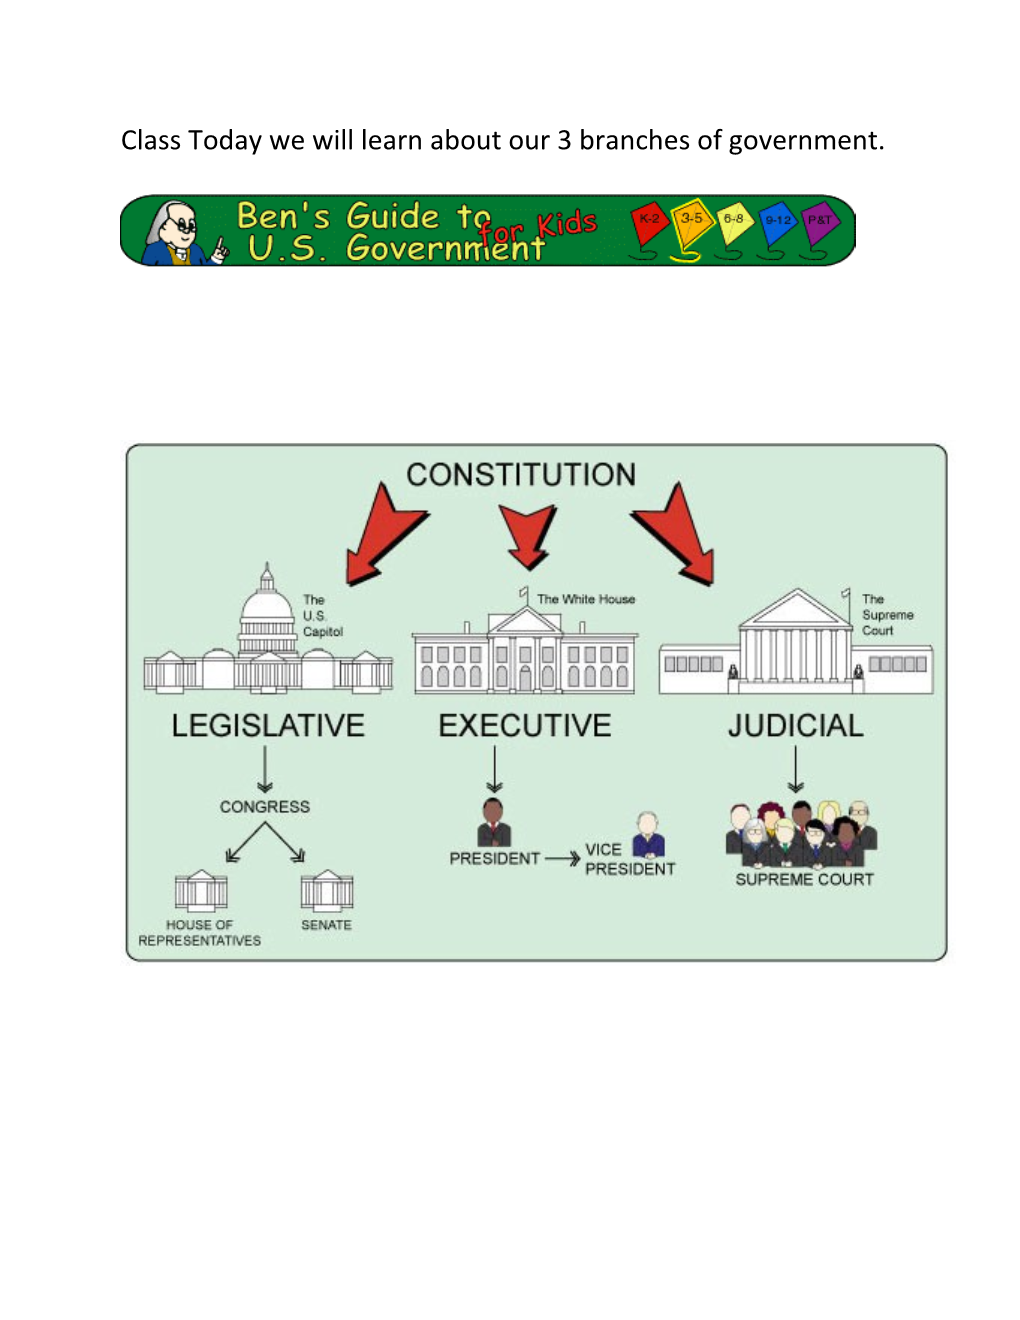 Class Today We Will Learn About Our 3 Branches of Government